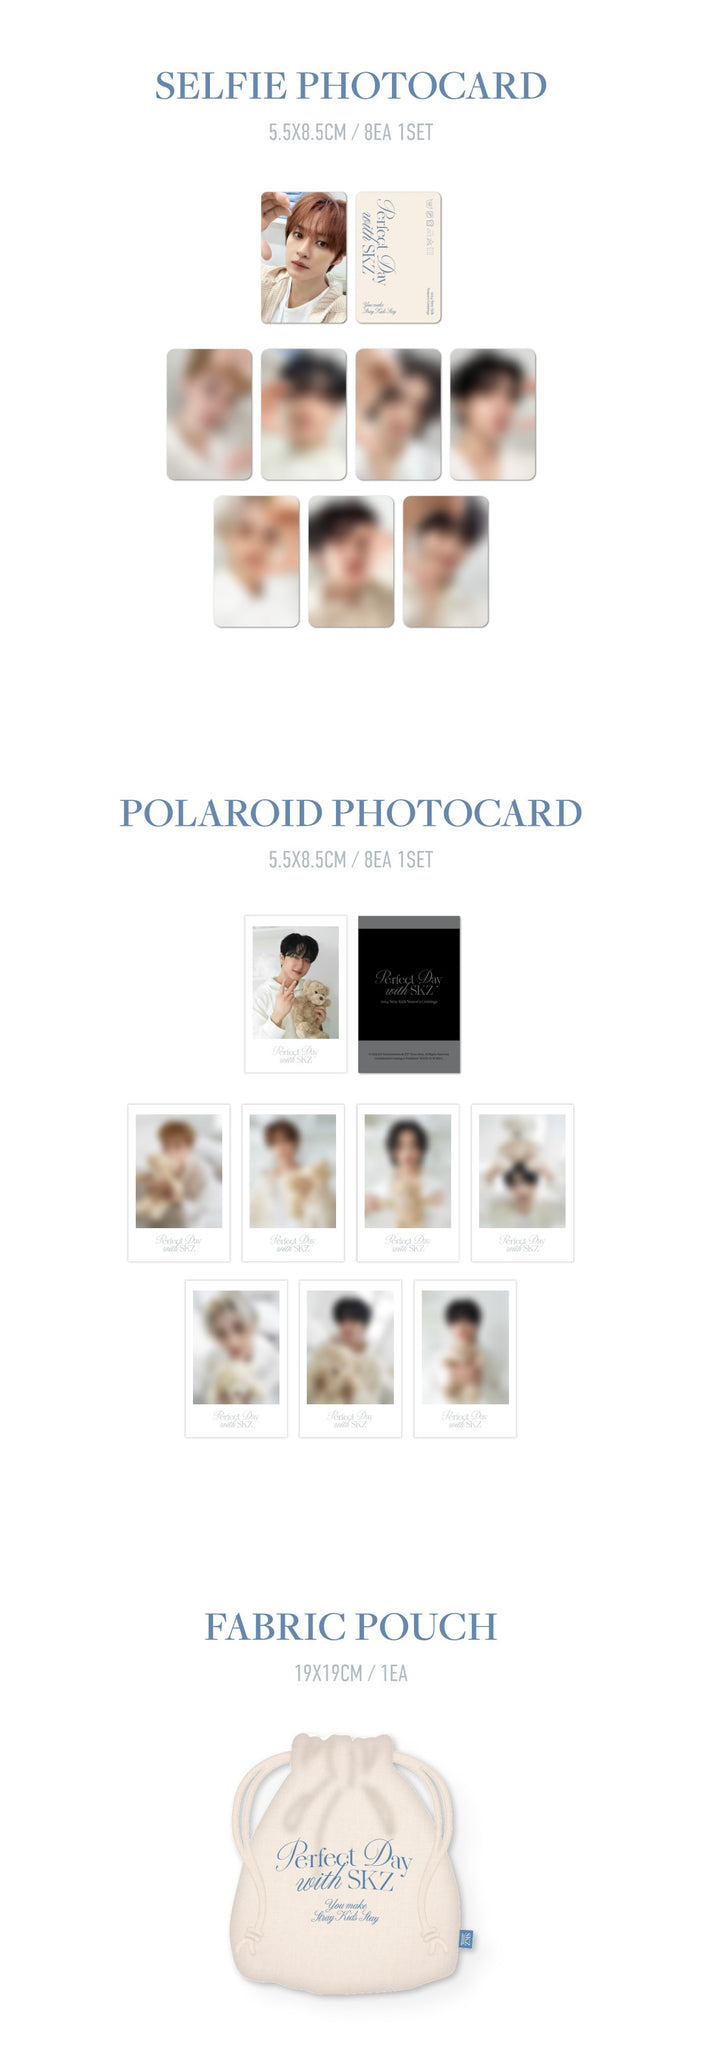 Perfect Day with SKZ Inclusions Selfie Photocards Polaroid Photocards Fabric Pouch